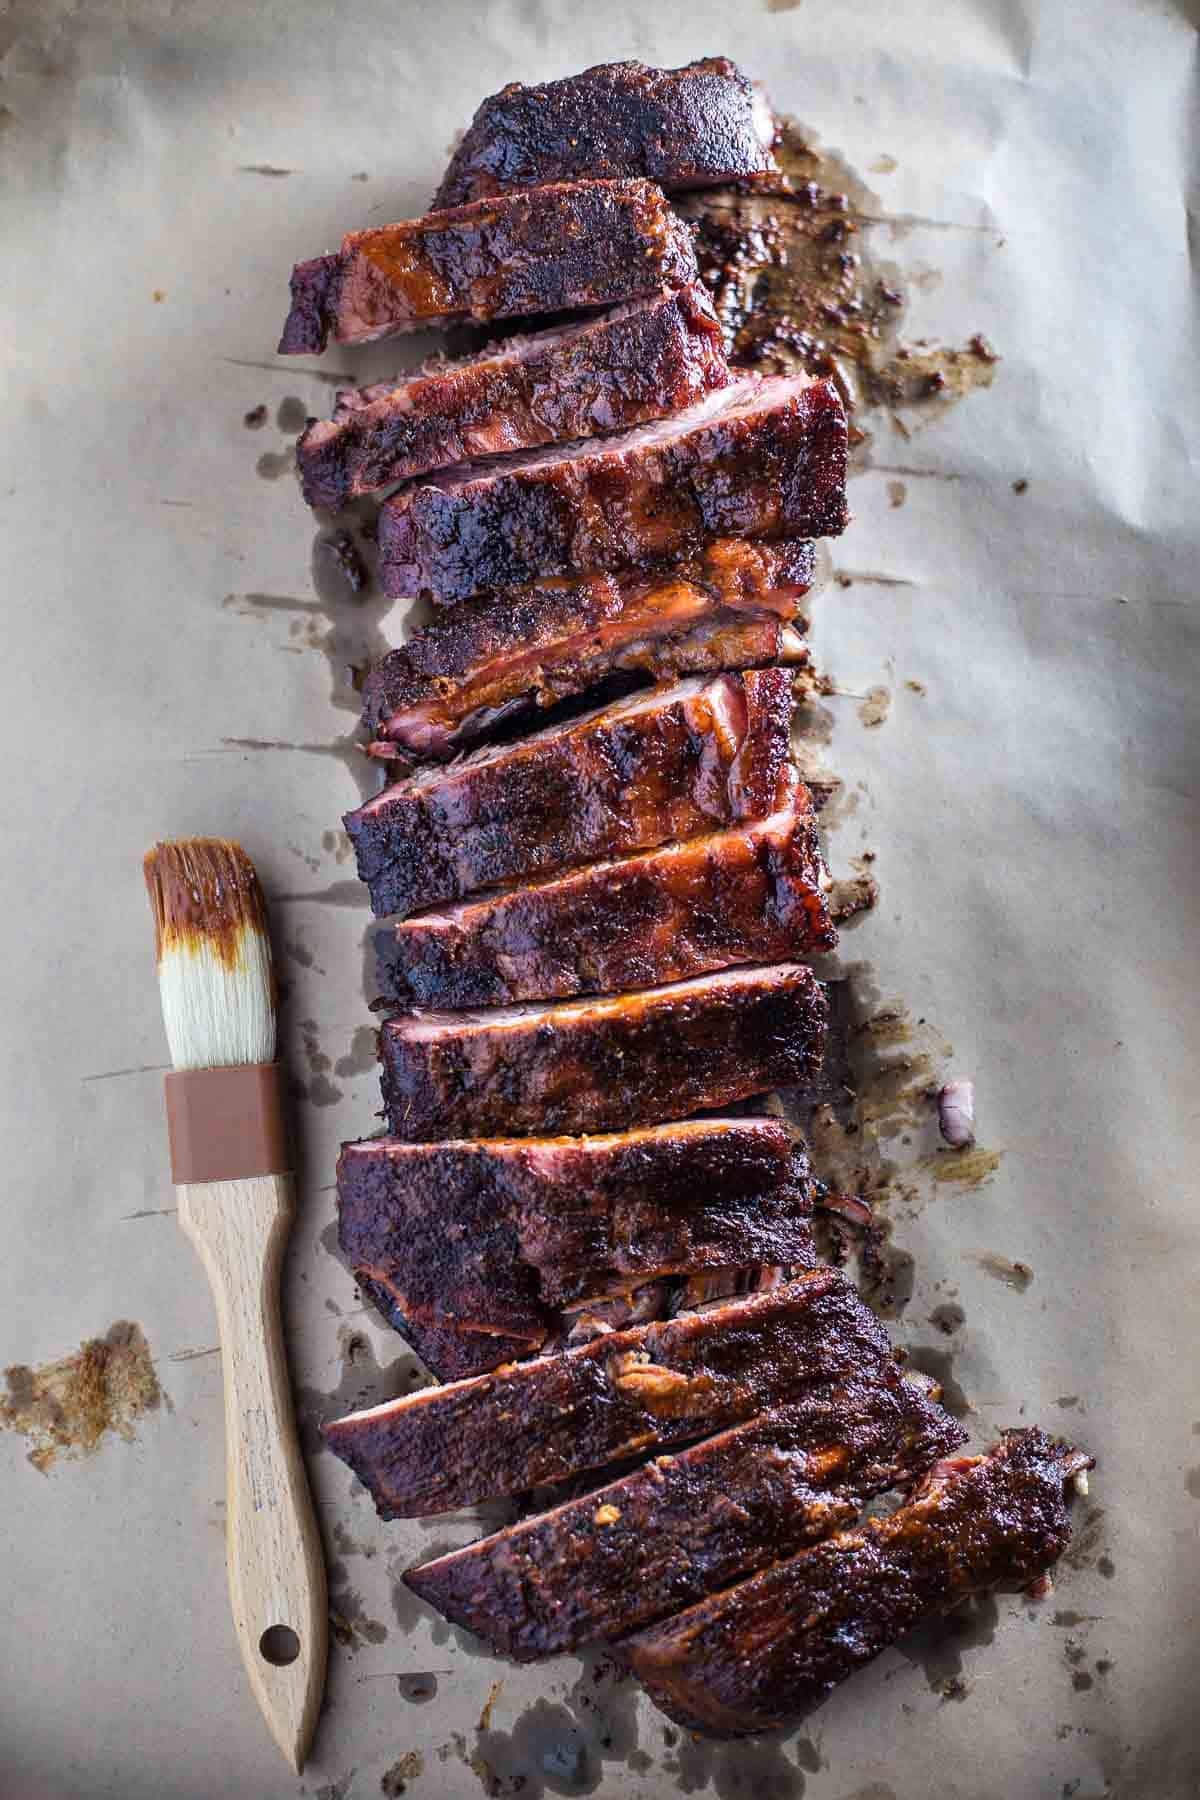 A rack of Smoked Ribs coated with a Low Sugar BBQ Sauce